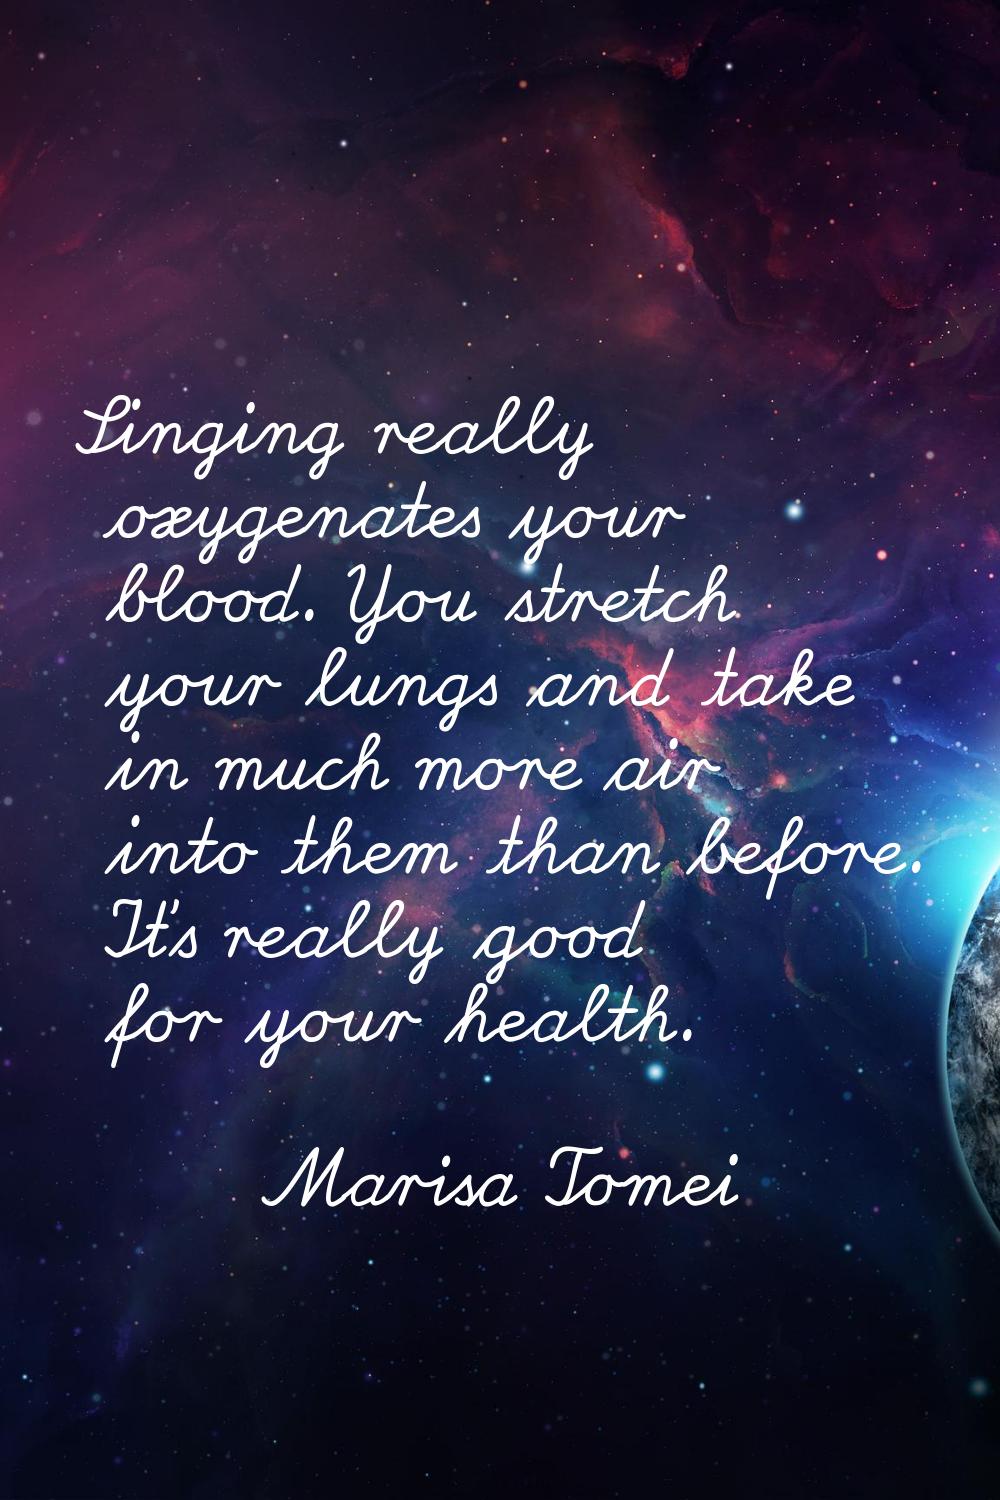 Singing really oxygenates your blood. You stretch your lungs and take in much more air into them th